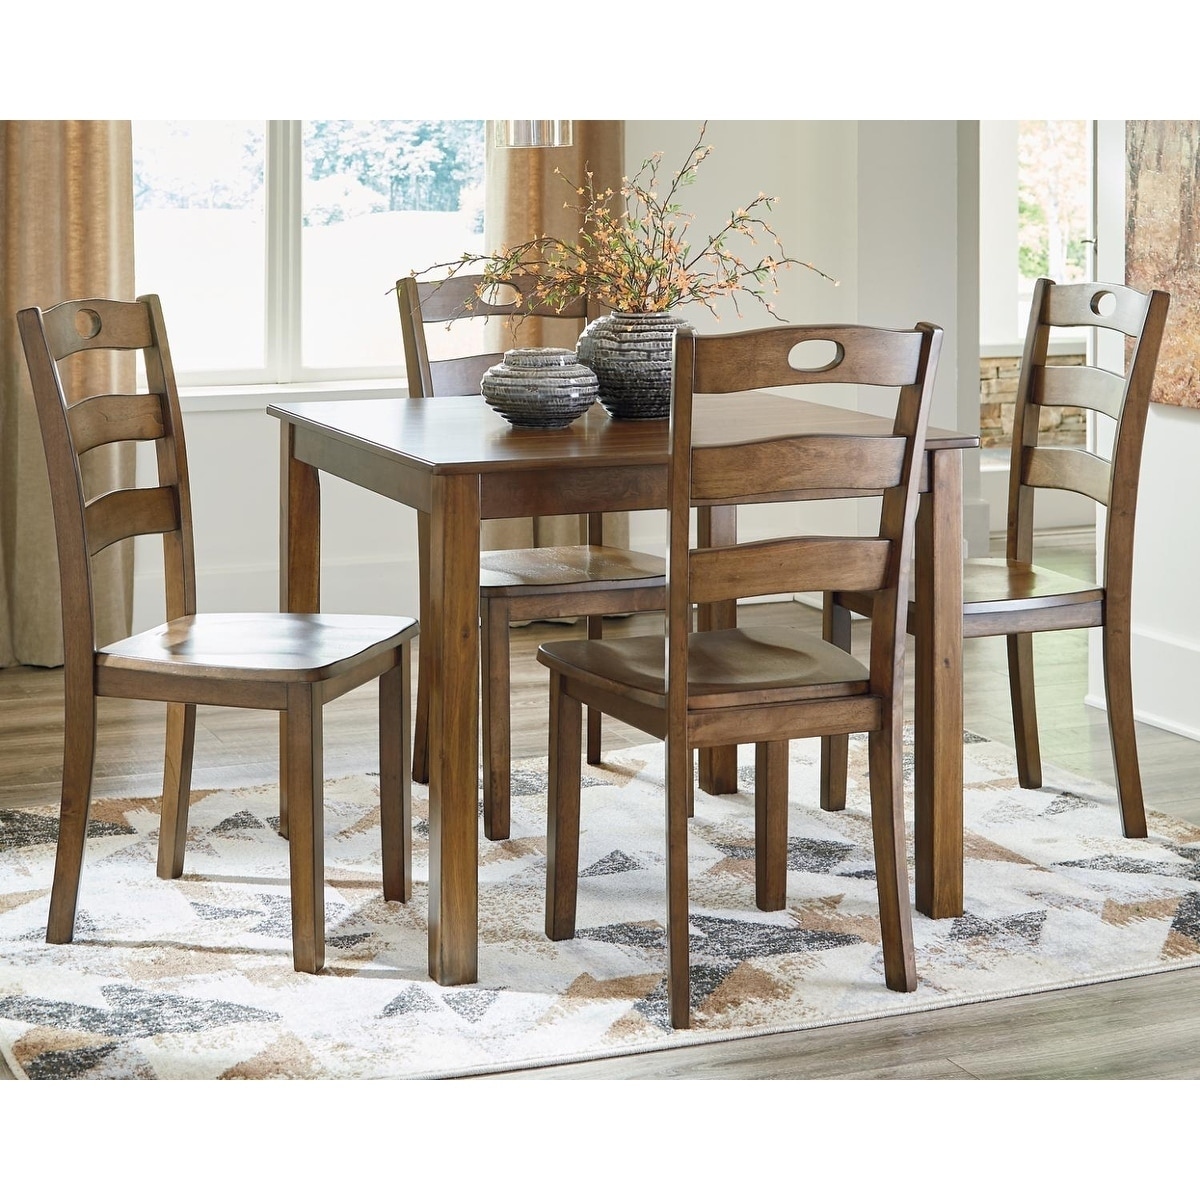 Hazelteen Square Dining Room Set Table And 4 Chairs Medium Brown Overstock 28029465